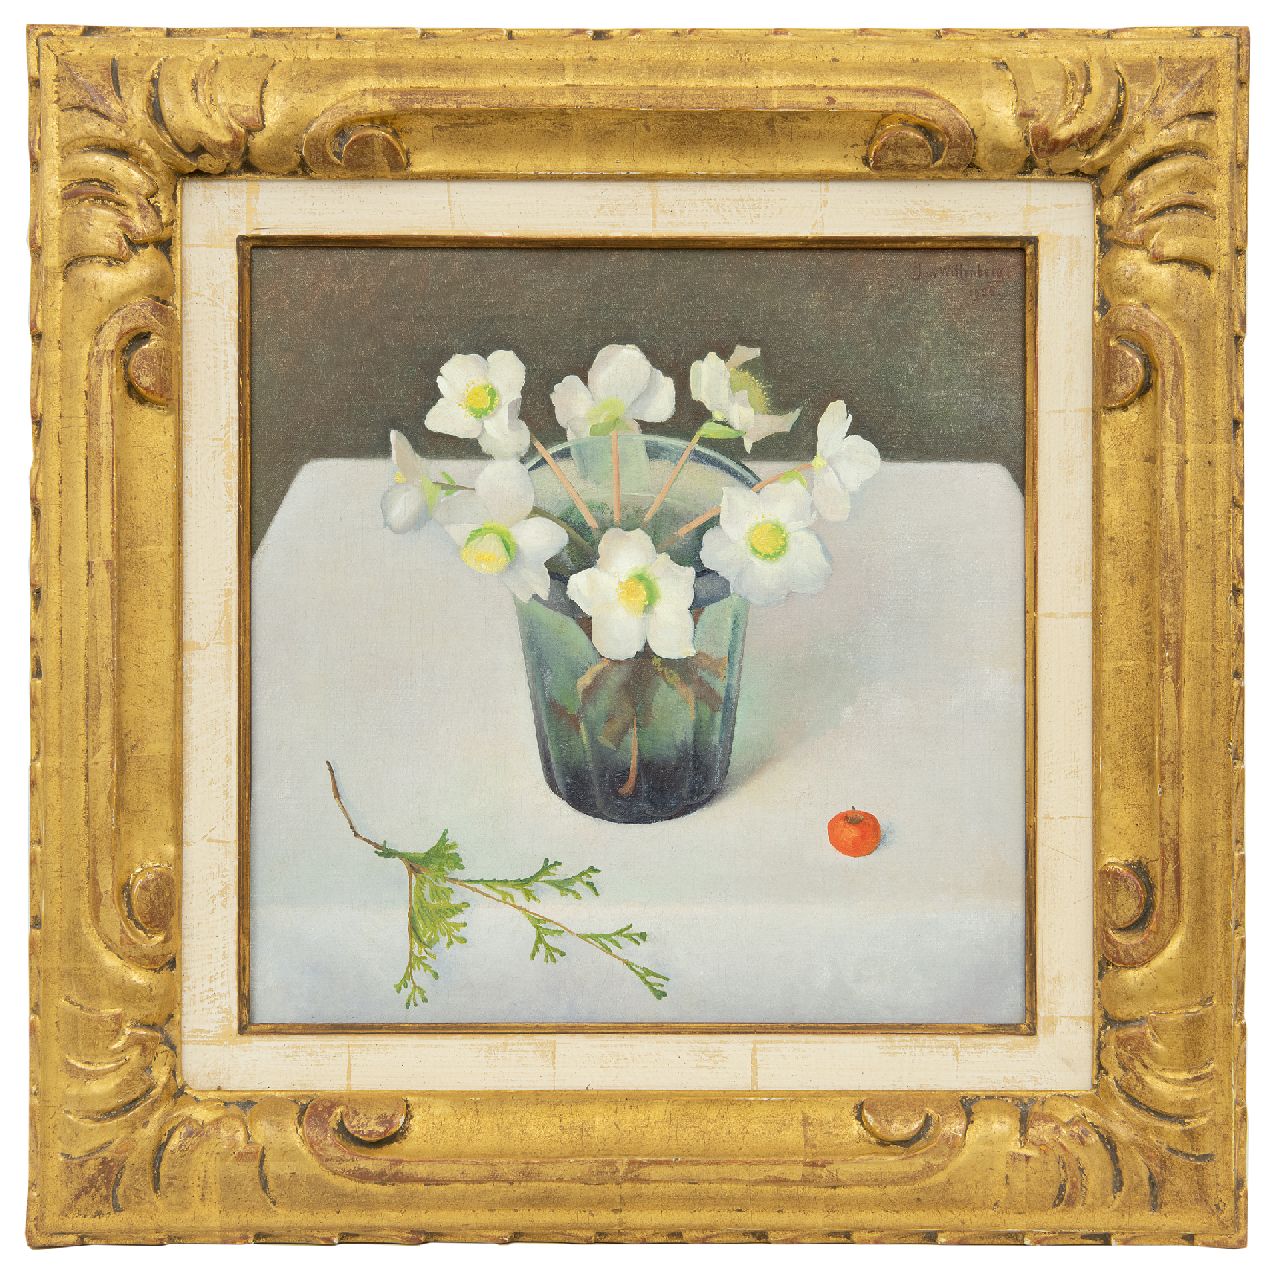 Wittenberg J.H.W.  | 'Jan' Hendrik Willem Wittenberg, A still life with white Helleboris, oil on canvas 30.7 x 30.5 cm, signed u.r. and dated 1938